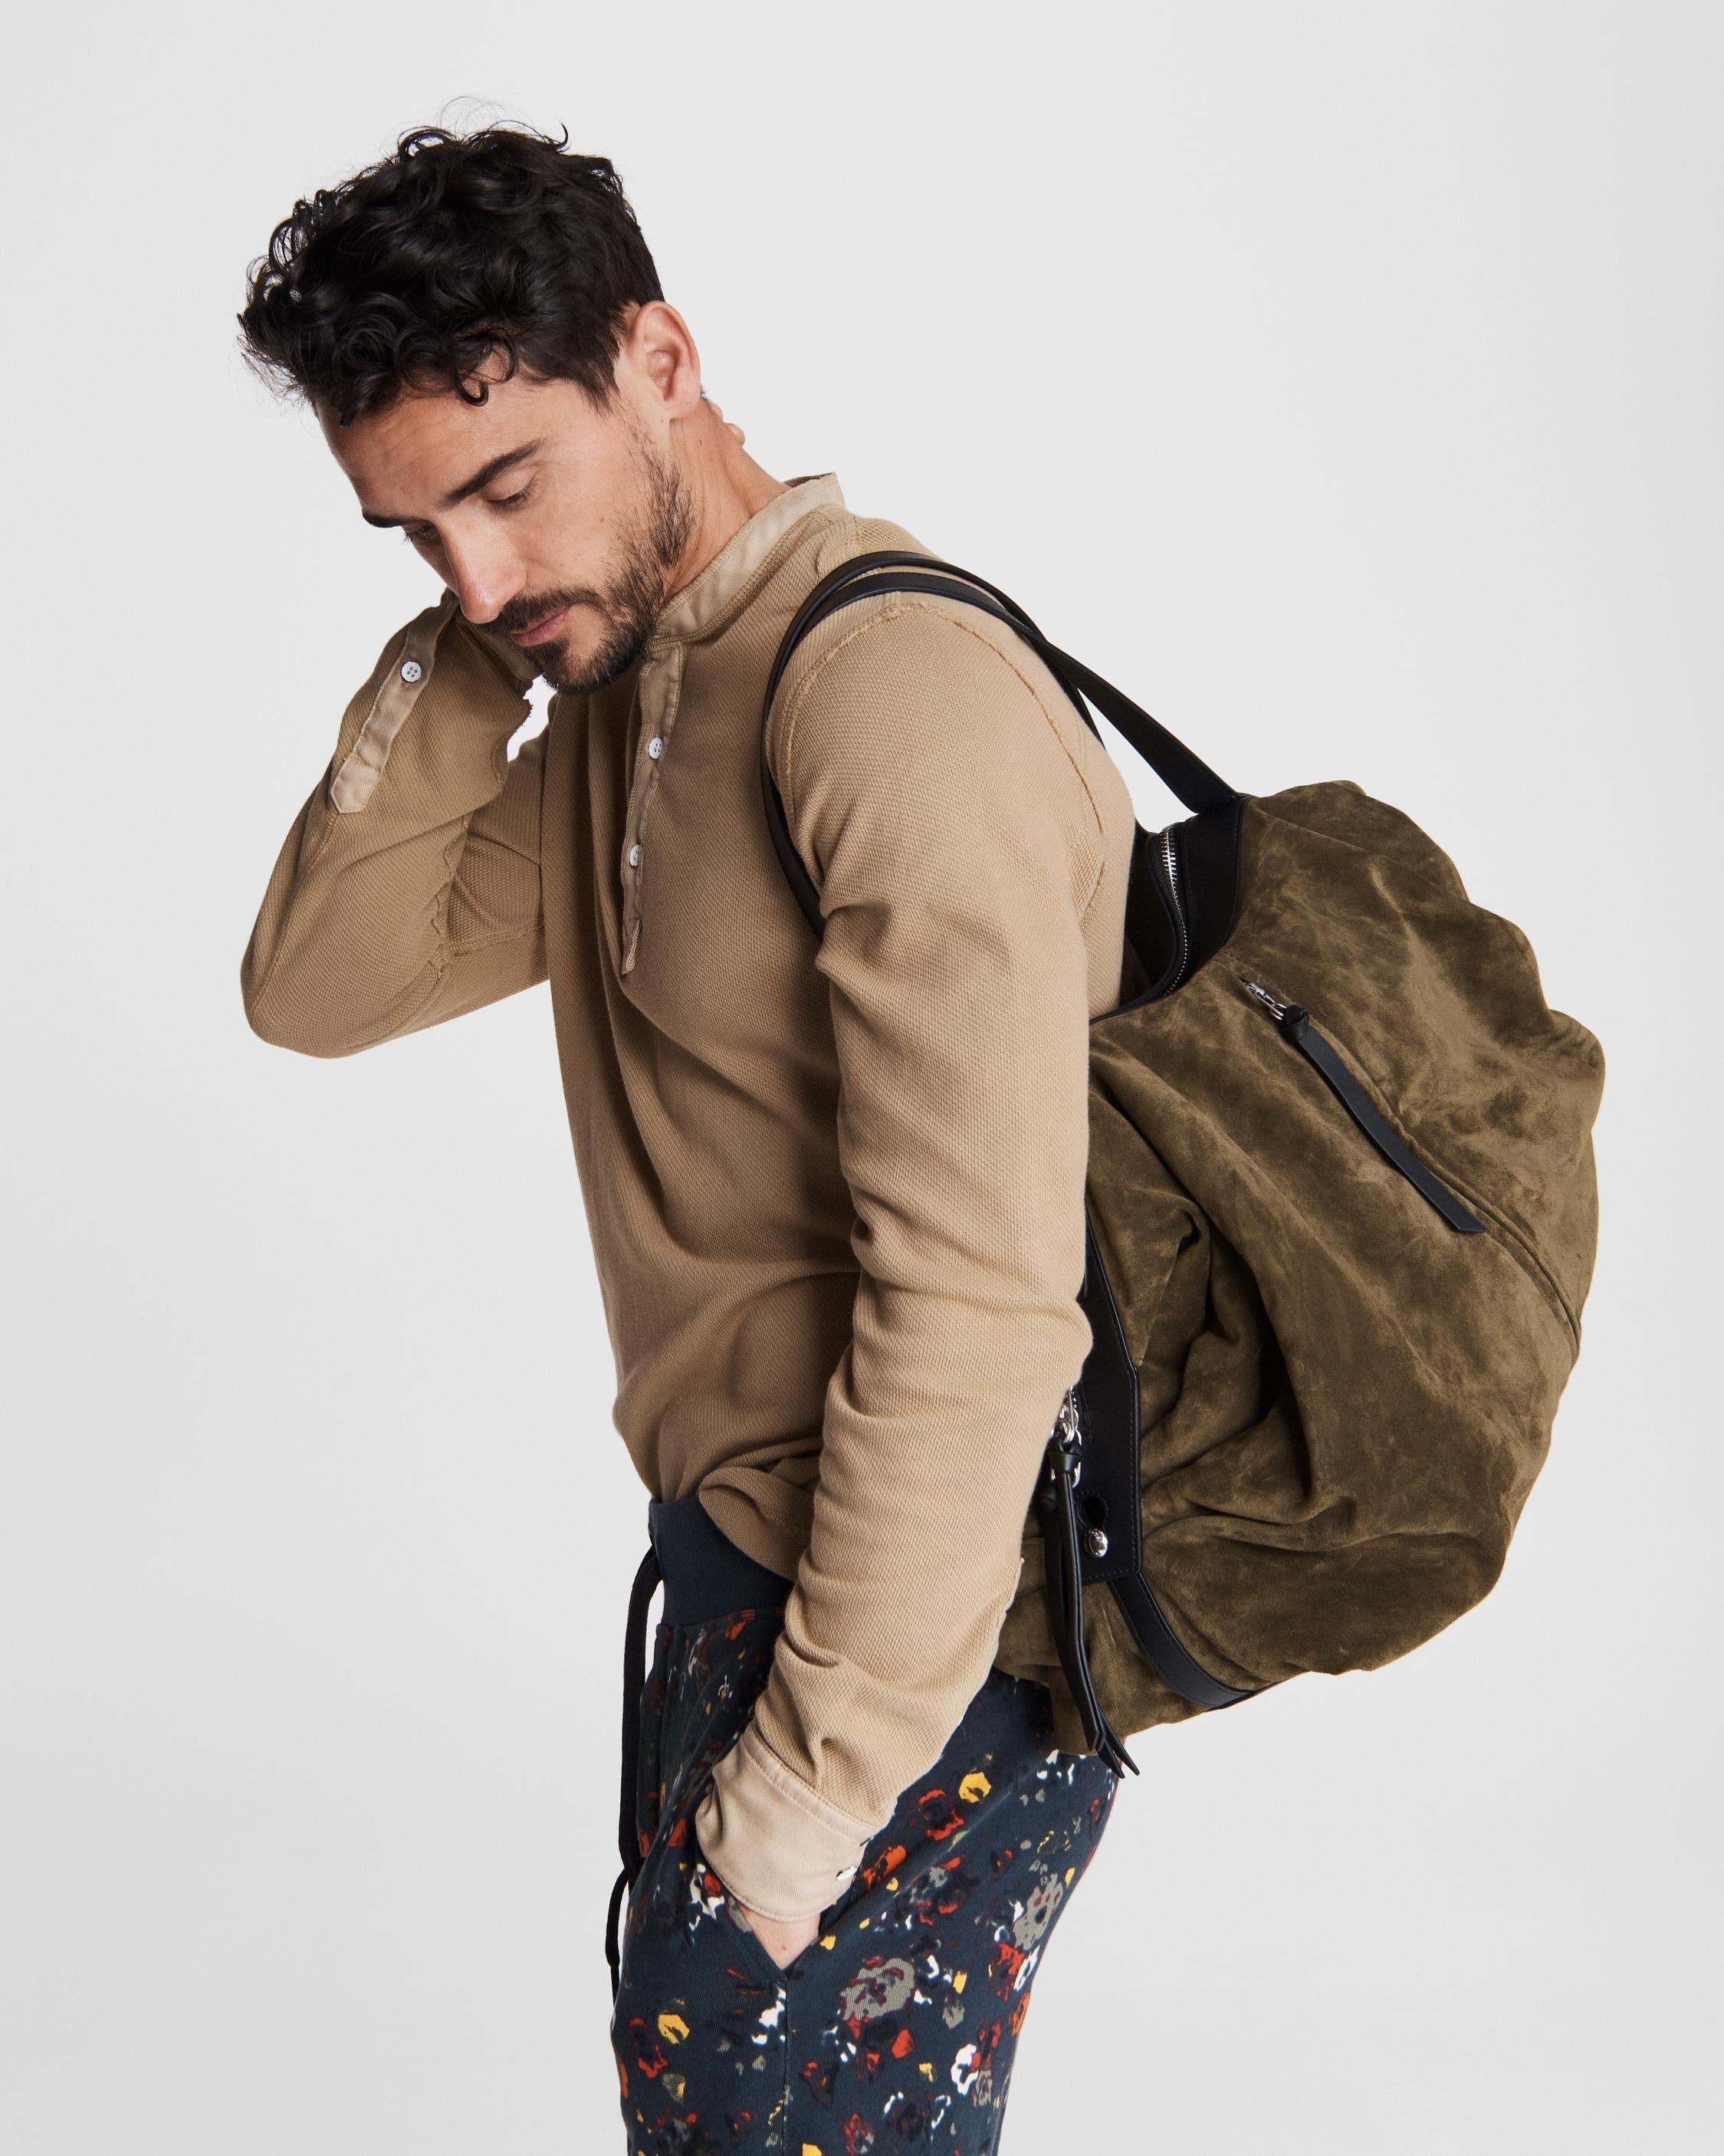 Commuter Overnighter - Suede
Large Duffle Bag - 3